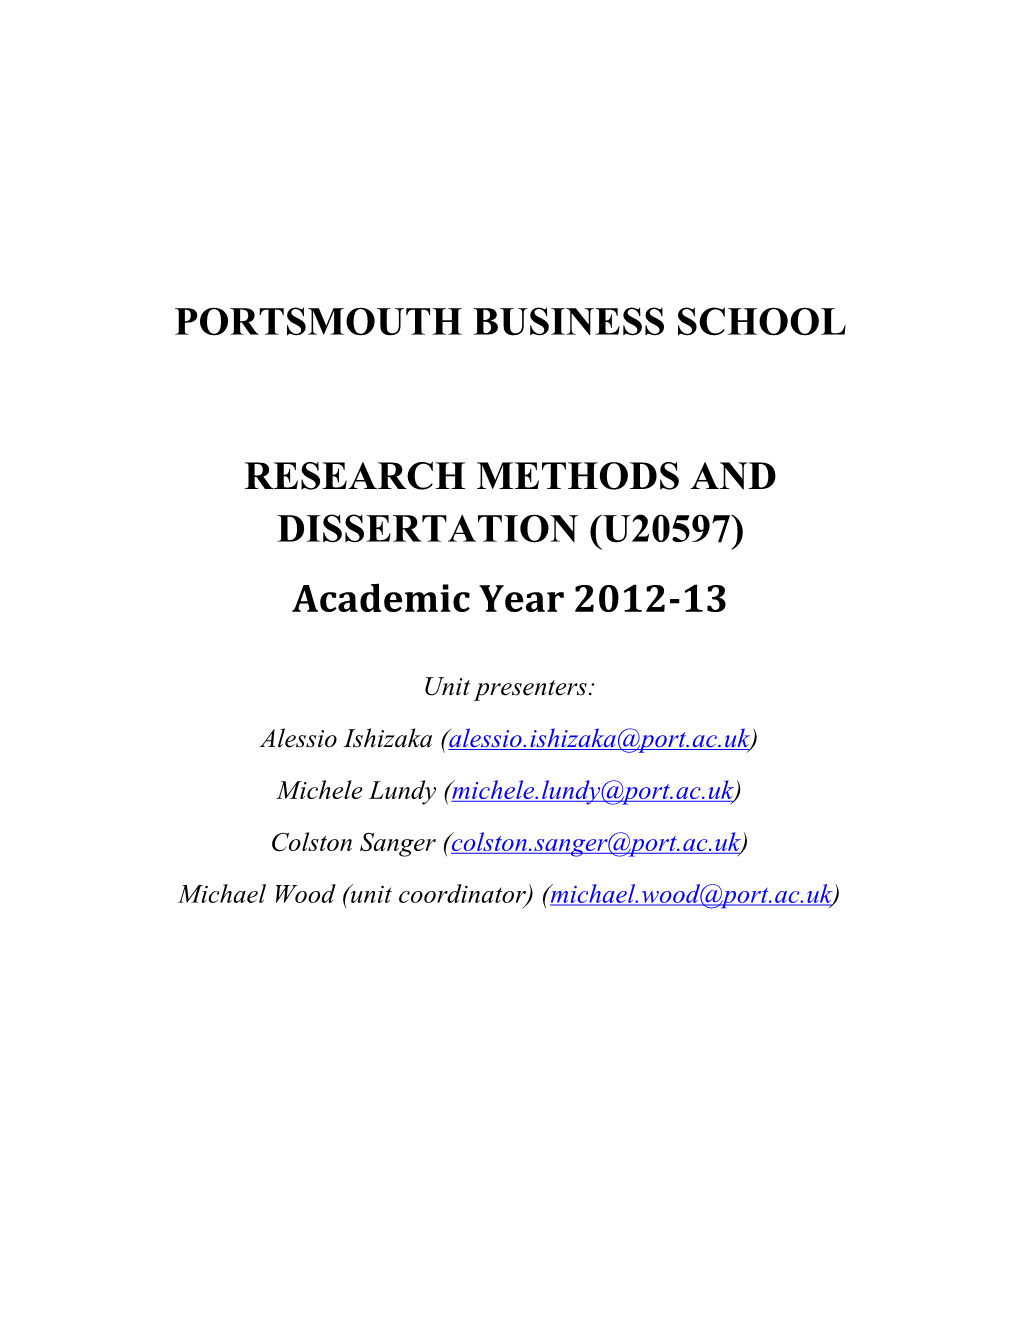 Research Methods and Dissertation (U20597)